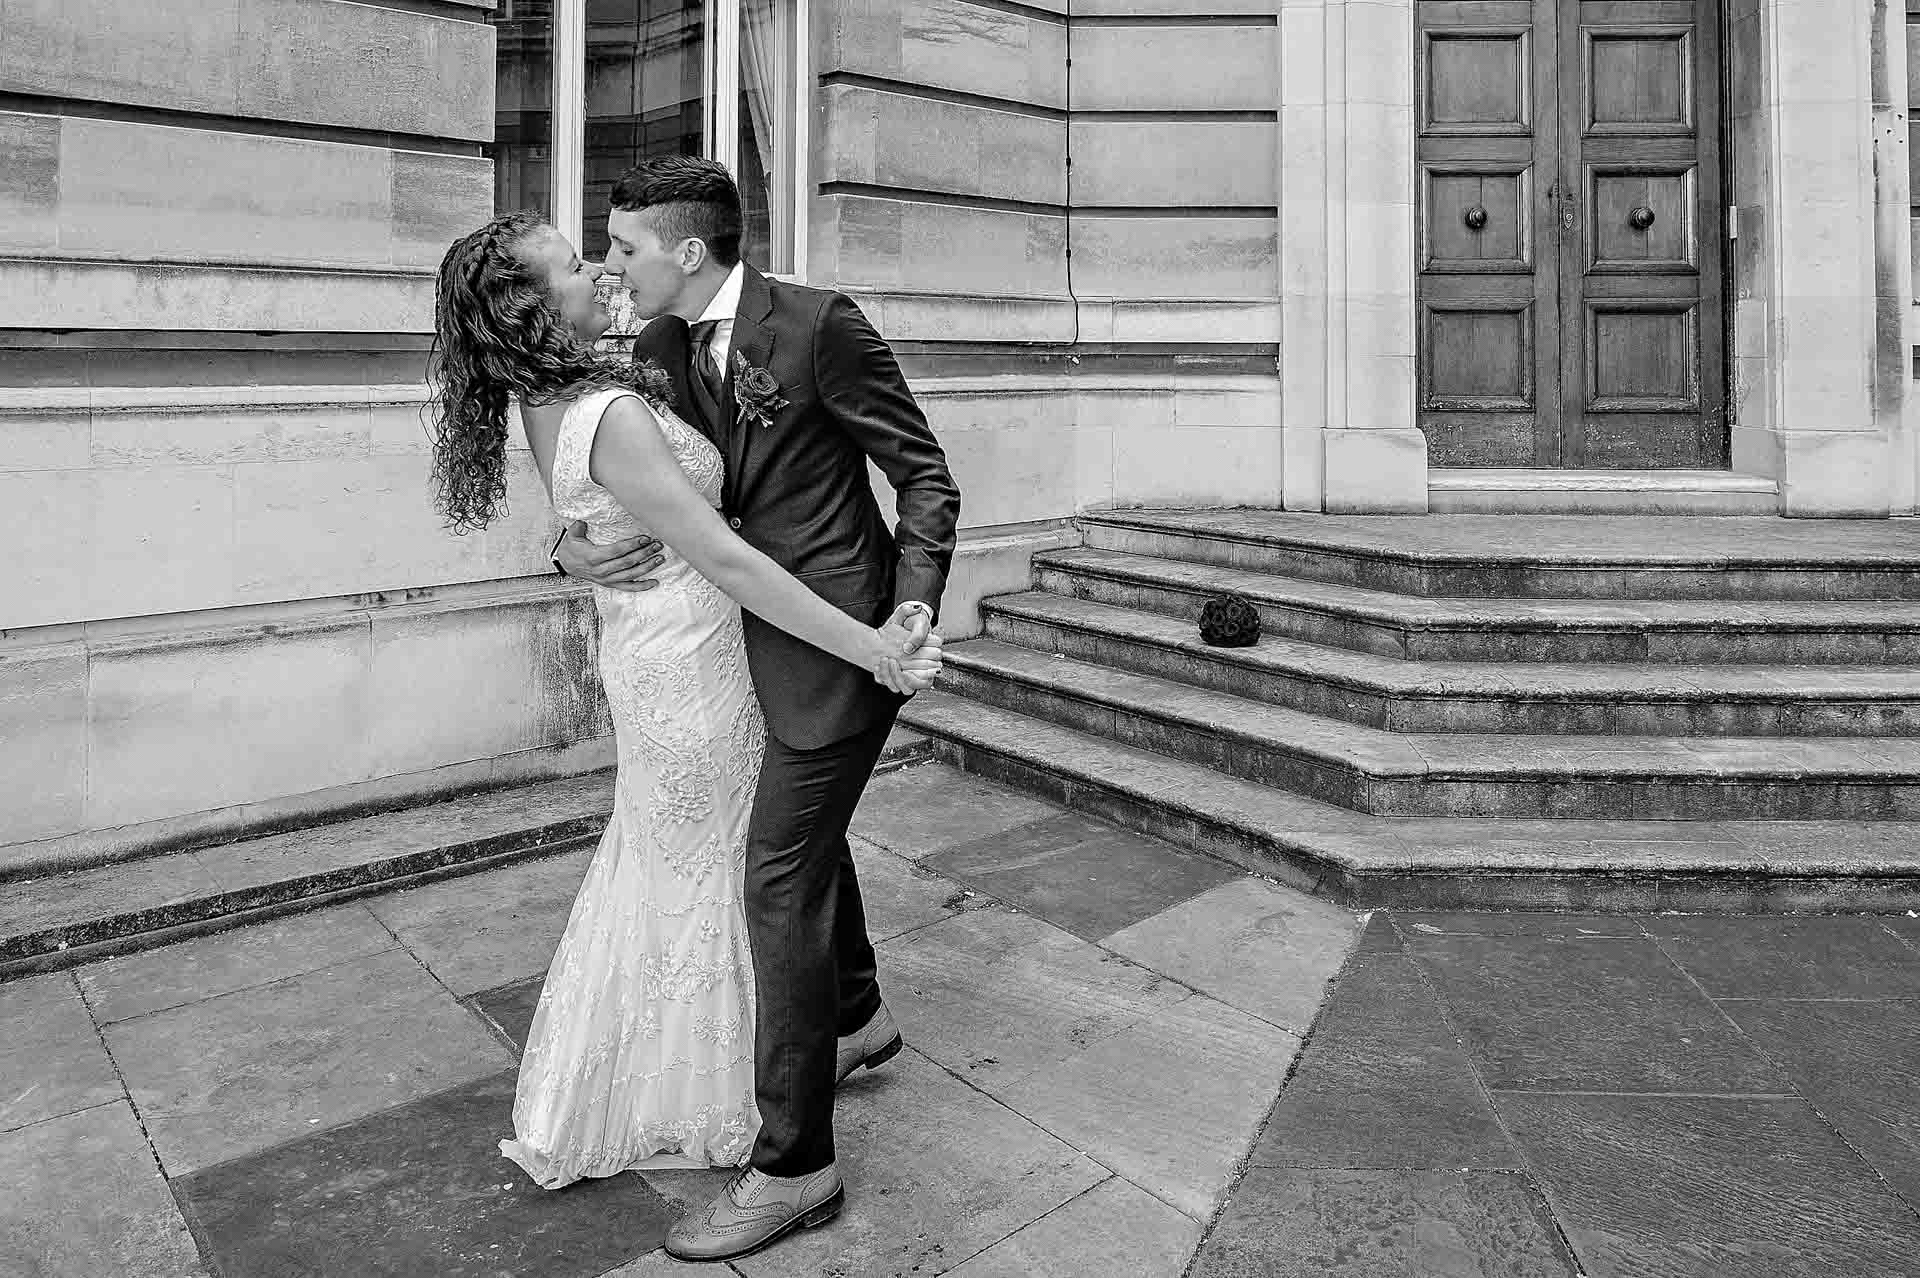 The newly-weds dance in courtyard of Wandsworth Town Hall